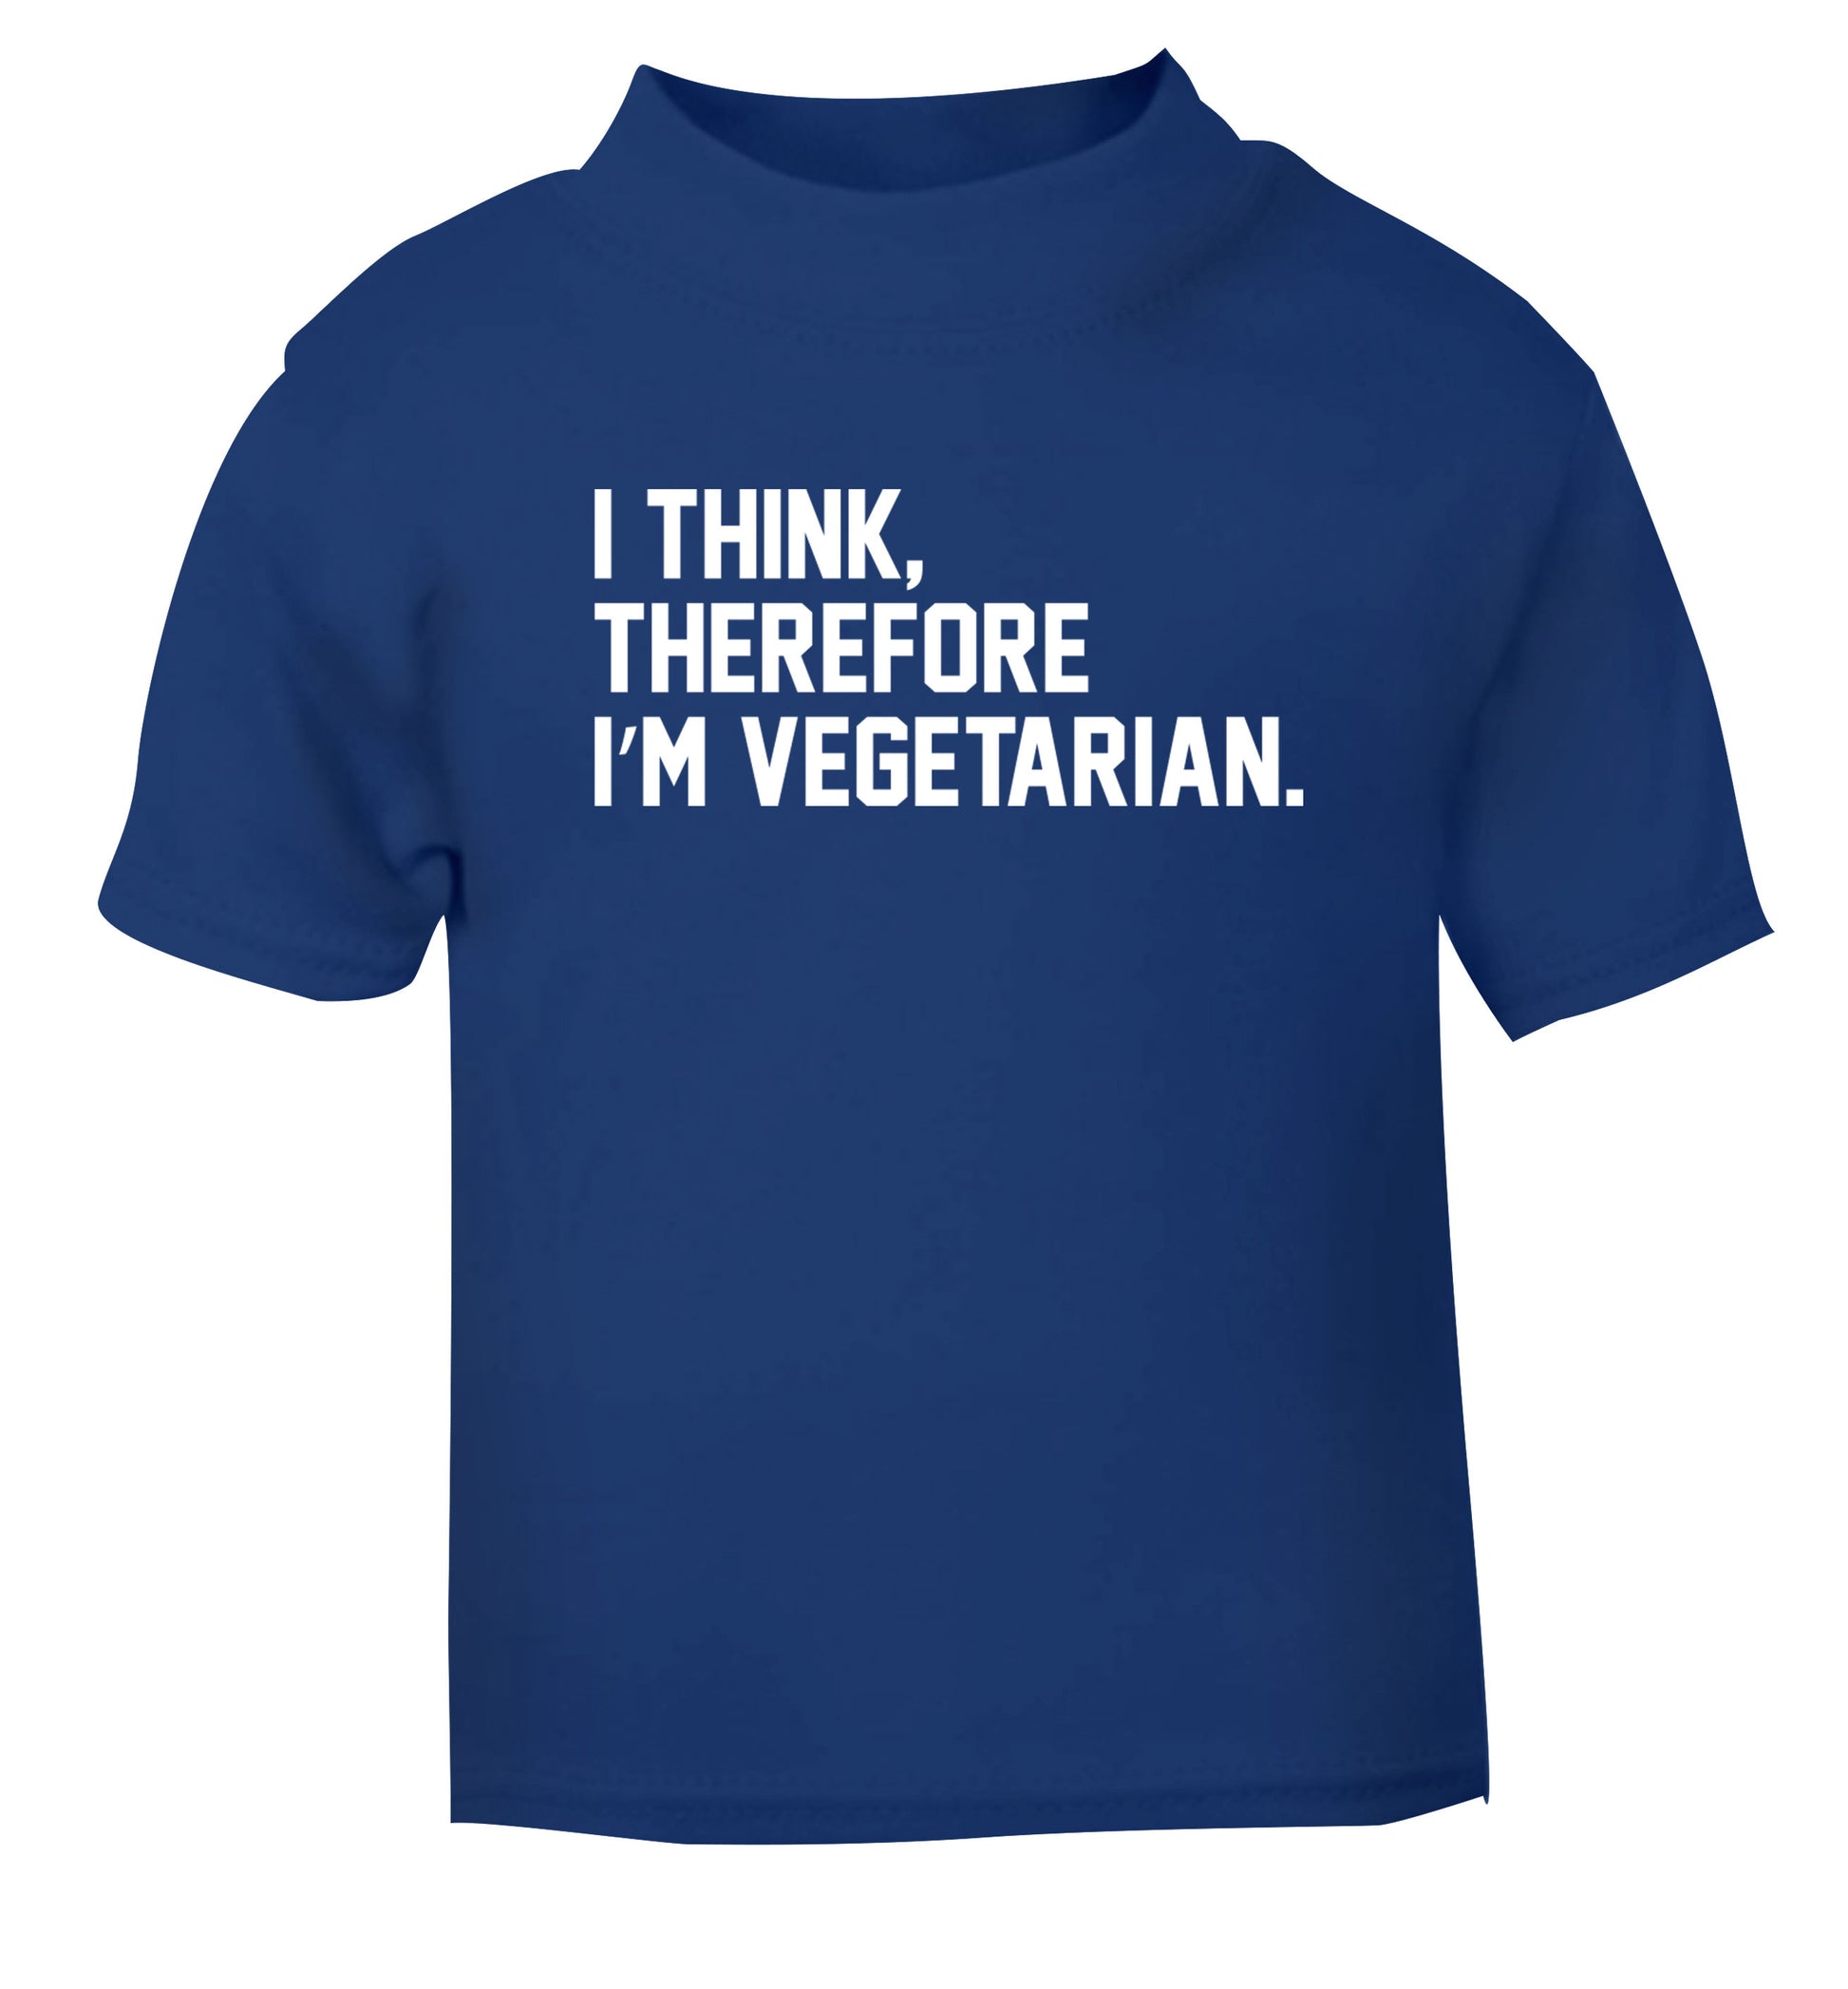 I think therefore I'm vegetarian blue Baby Toddler Tshirt 2 Years